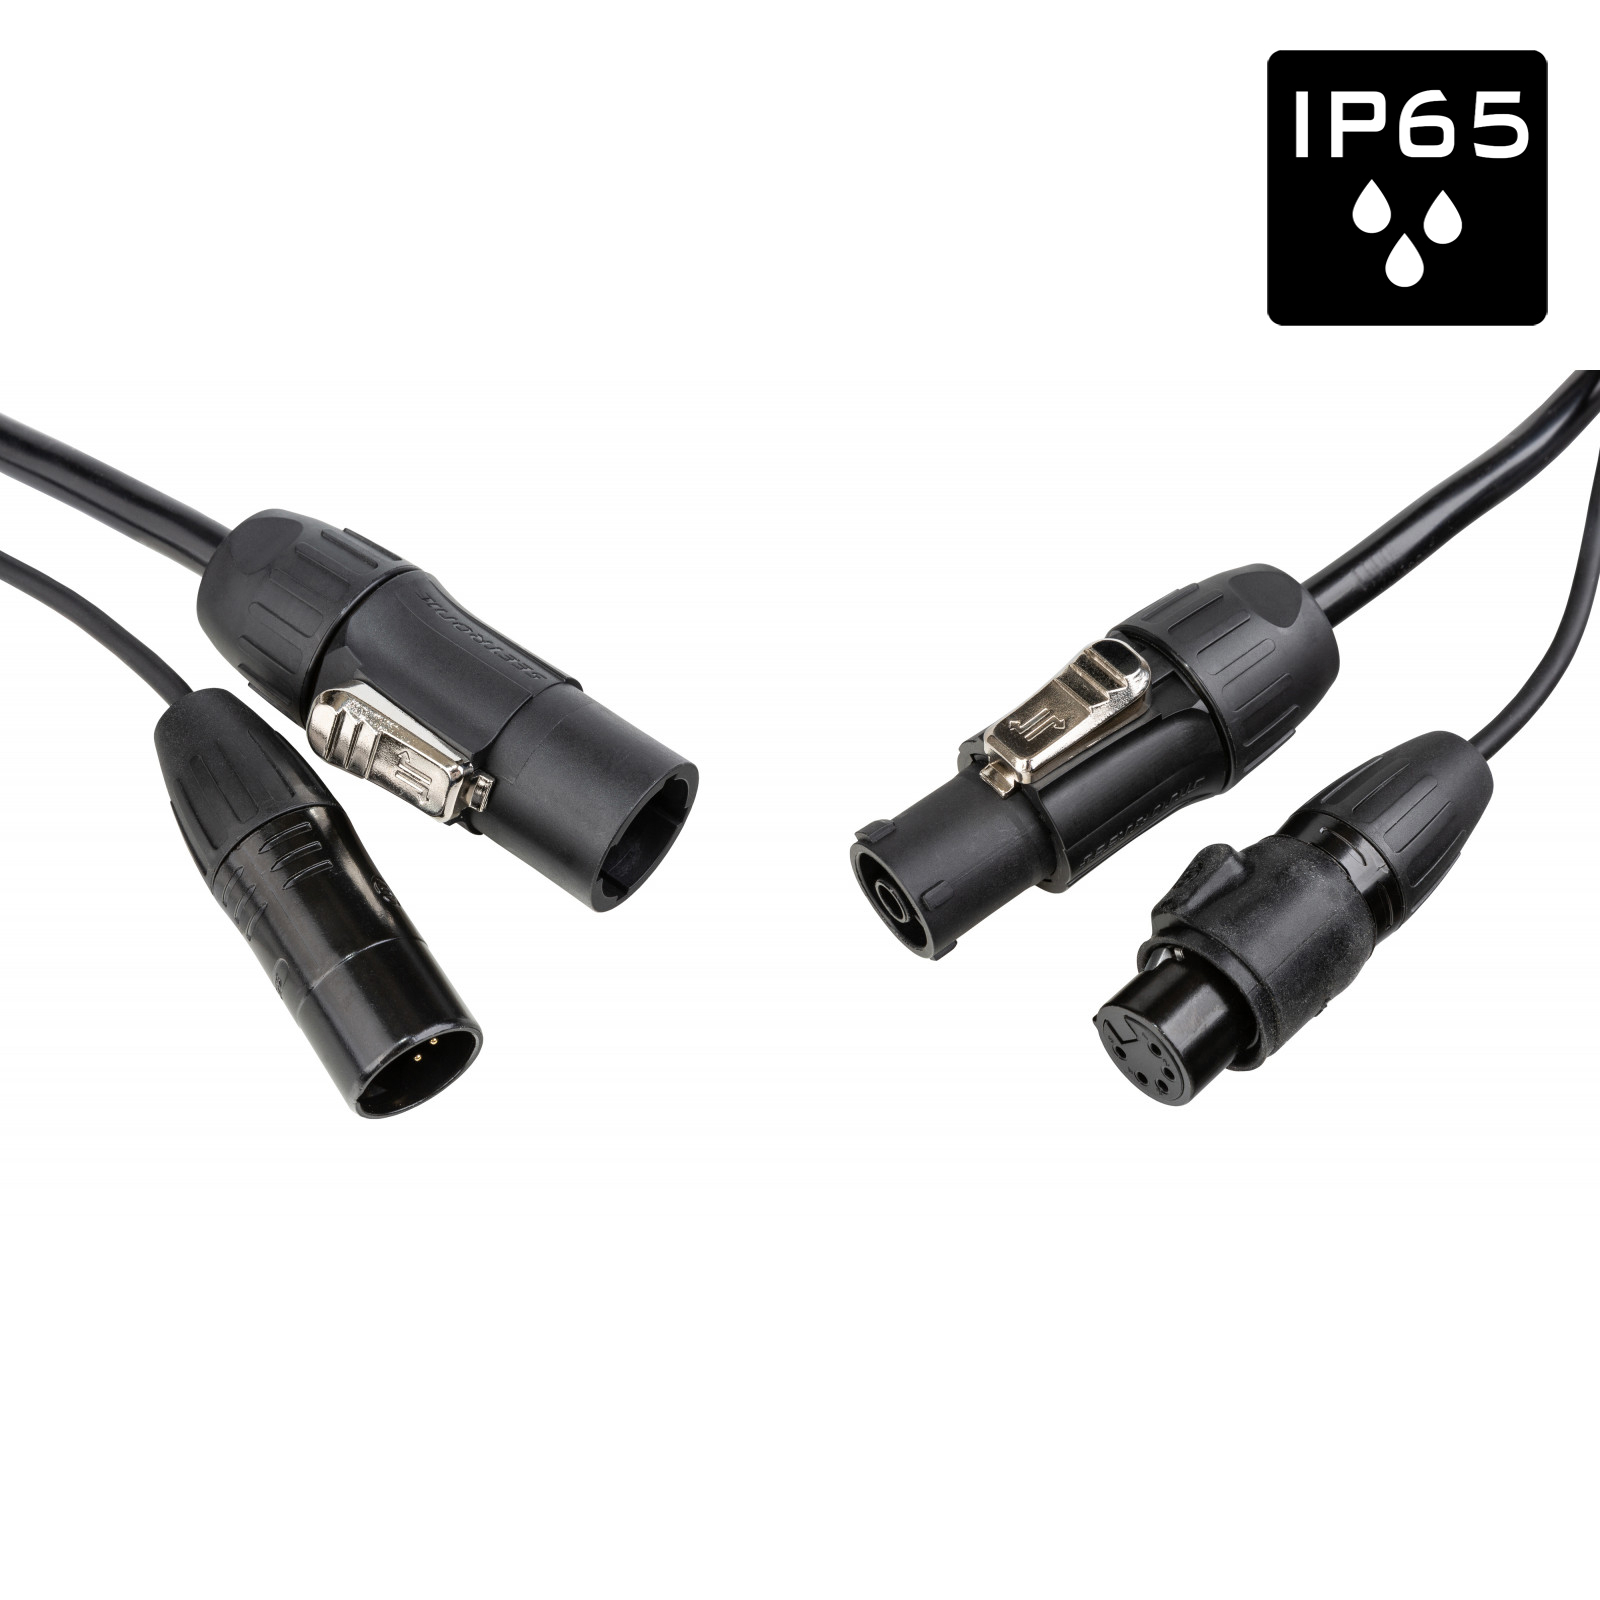 IP65 Outdoor combi cable with Seetronic XLR 5pin and True1 compatible connectors - Length 10m